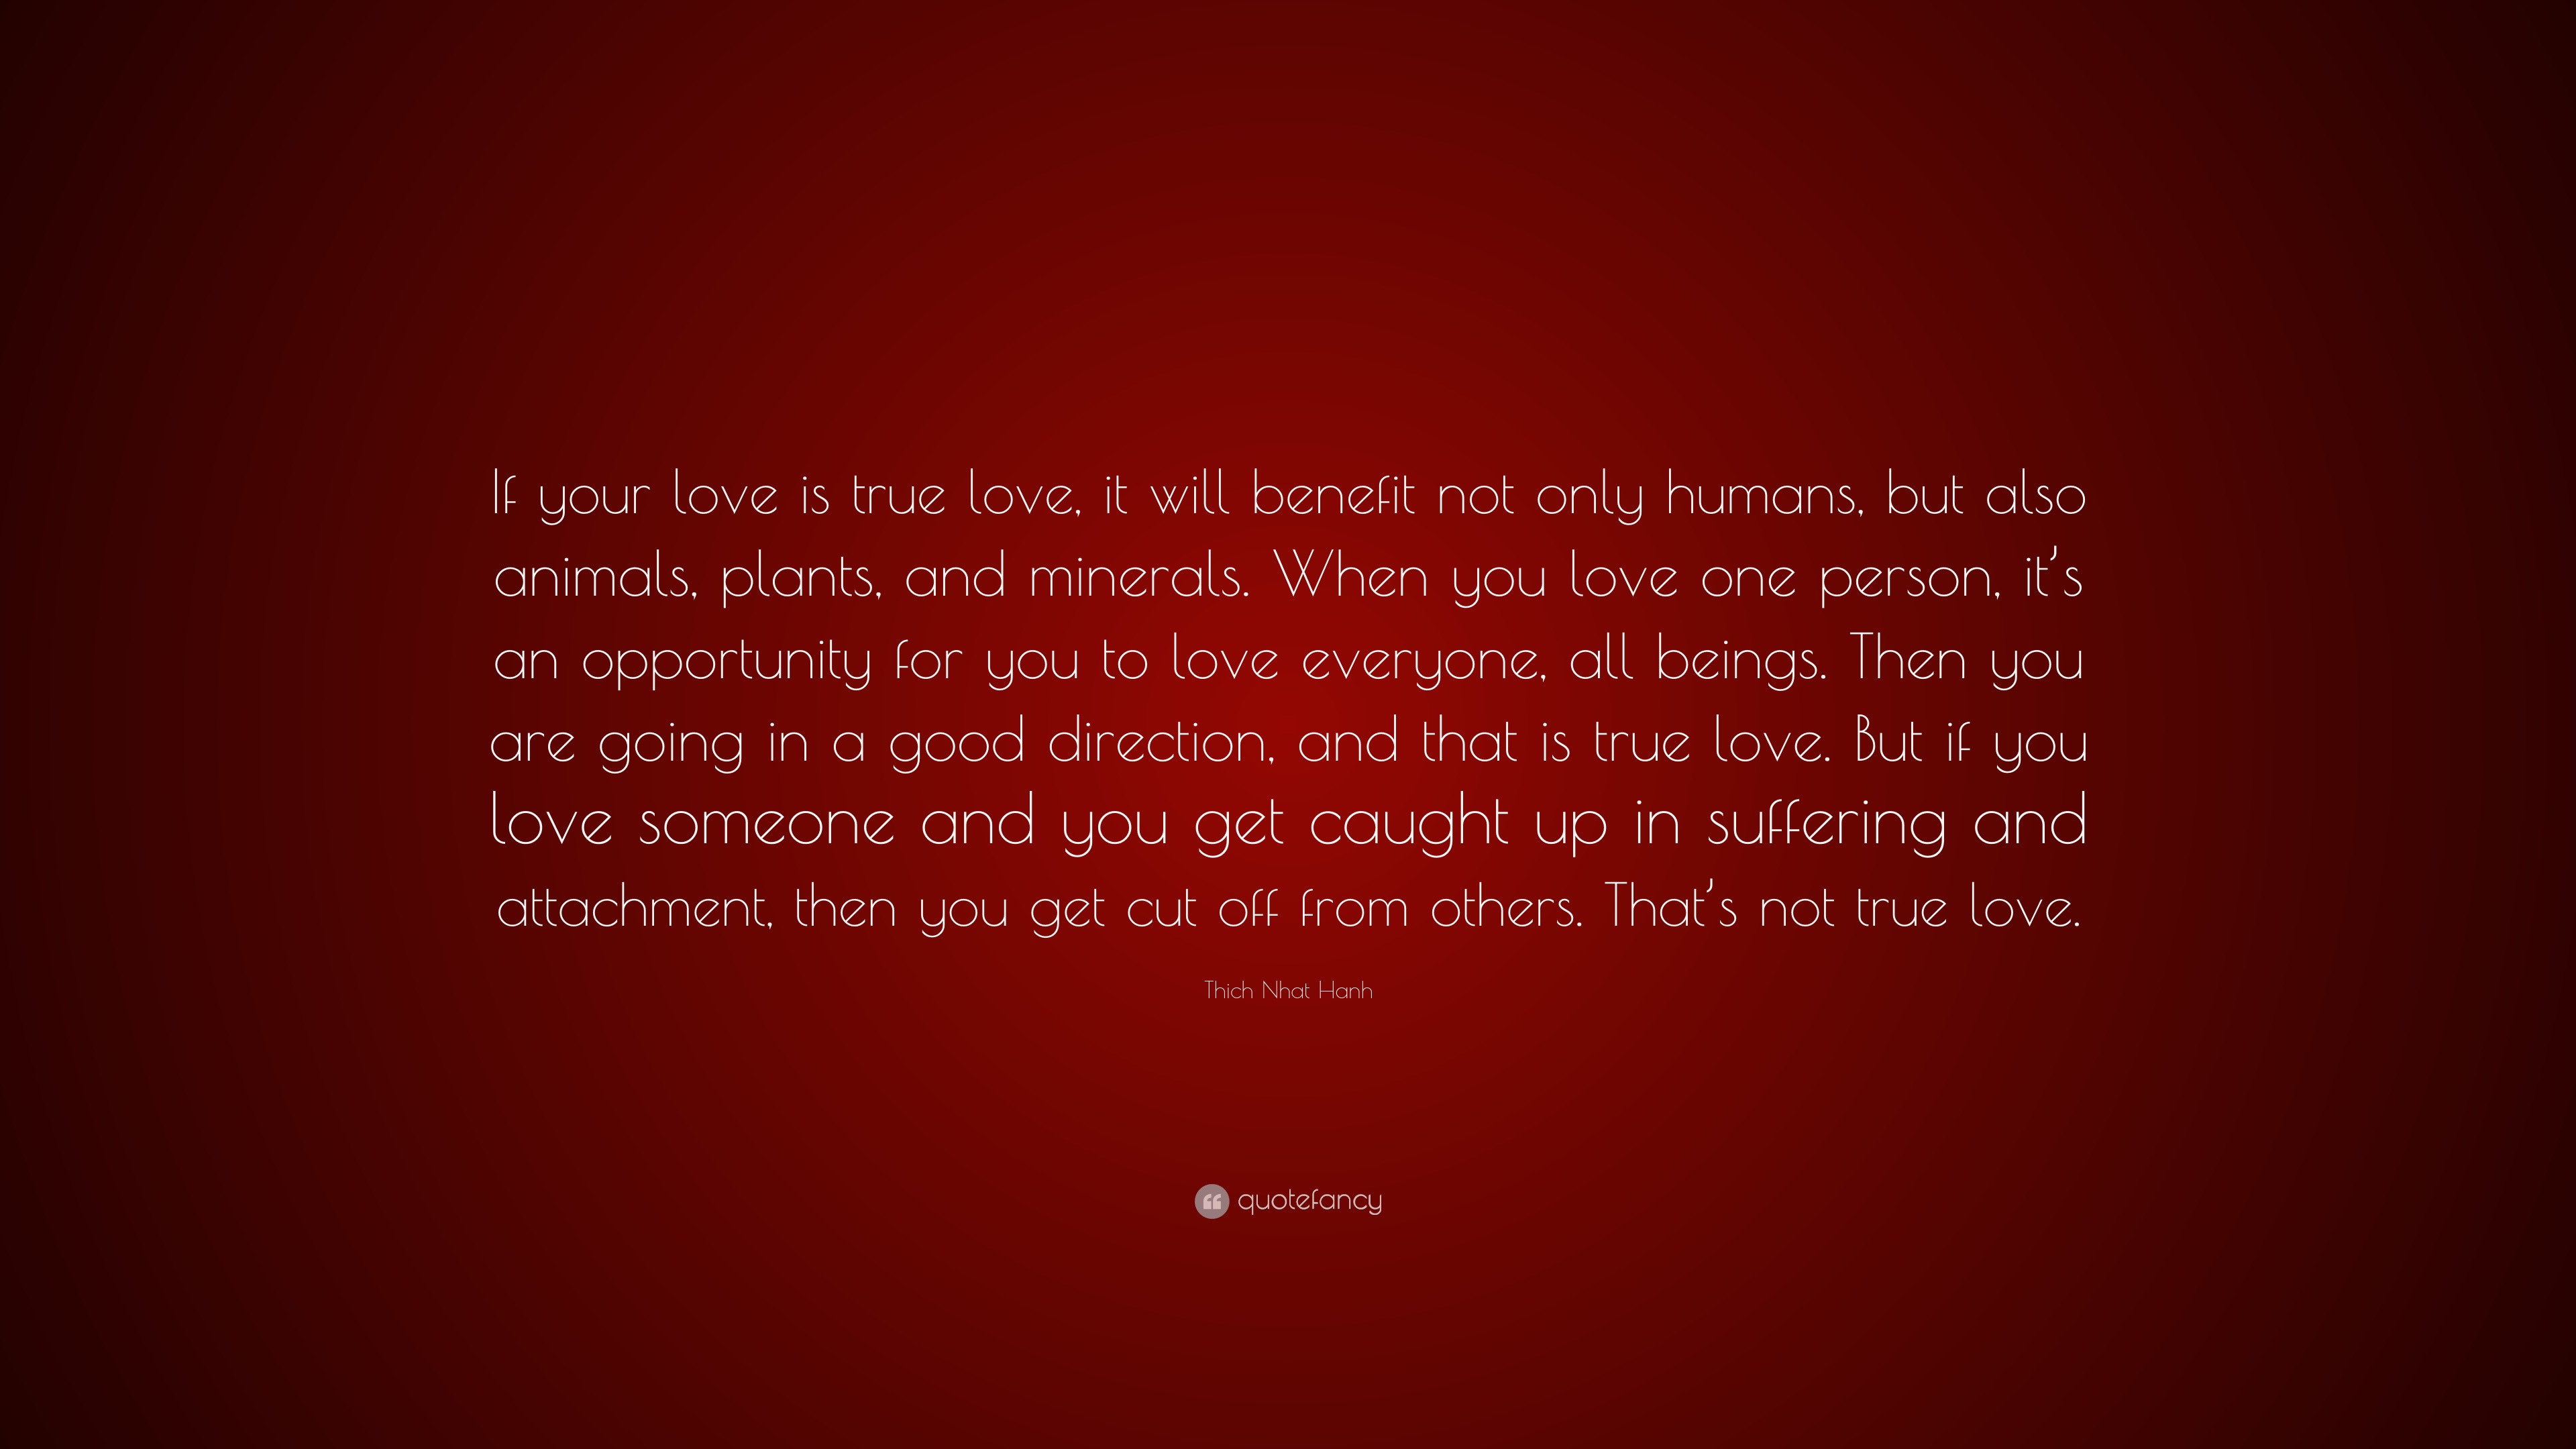 Thich Nhat Hanh Quote “if Your Love Is True Love It Will Benefit Not Only Humans But Also